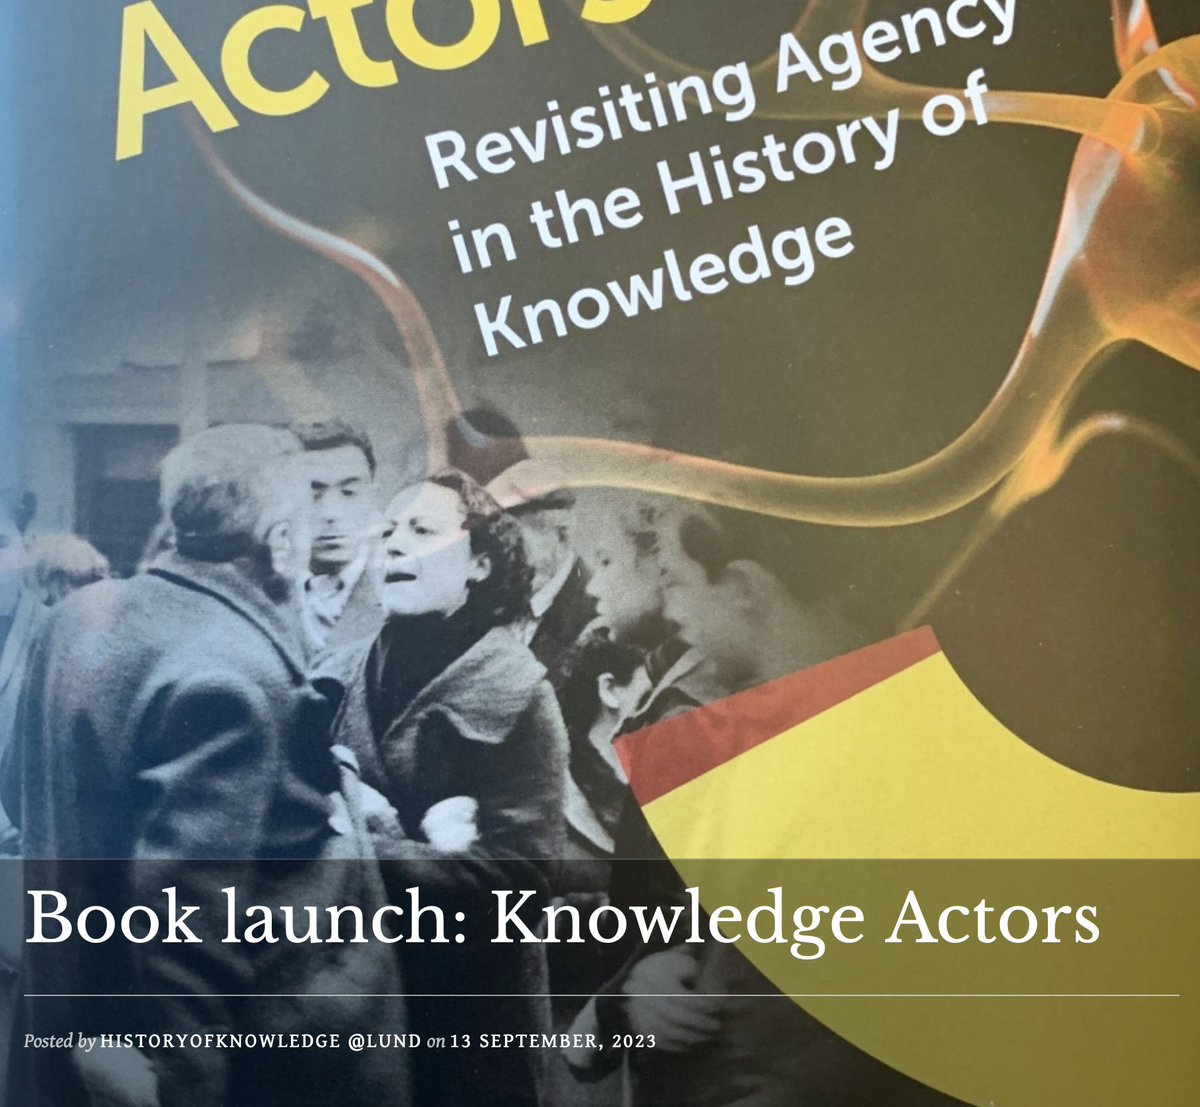 BOOK LAUNCH: LUCK’s first seminar this semester takes place on 18 September, 13.15–14.30 (CEST), and is a digital book launch of “Knowledge Actors: Revisiting Agency in the History”. Welcome to join us! newhistoryofknowledge.com/2023/09/13/boo…